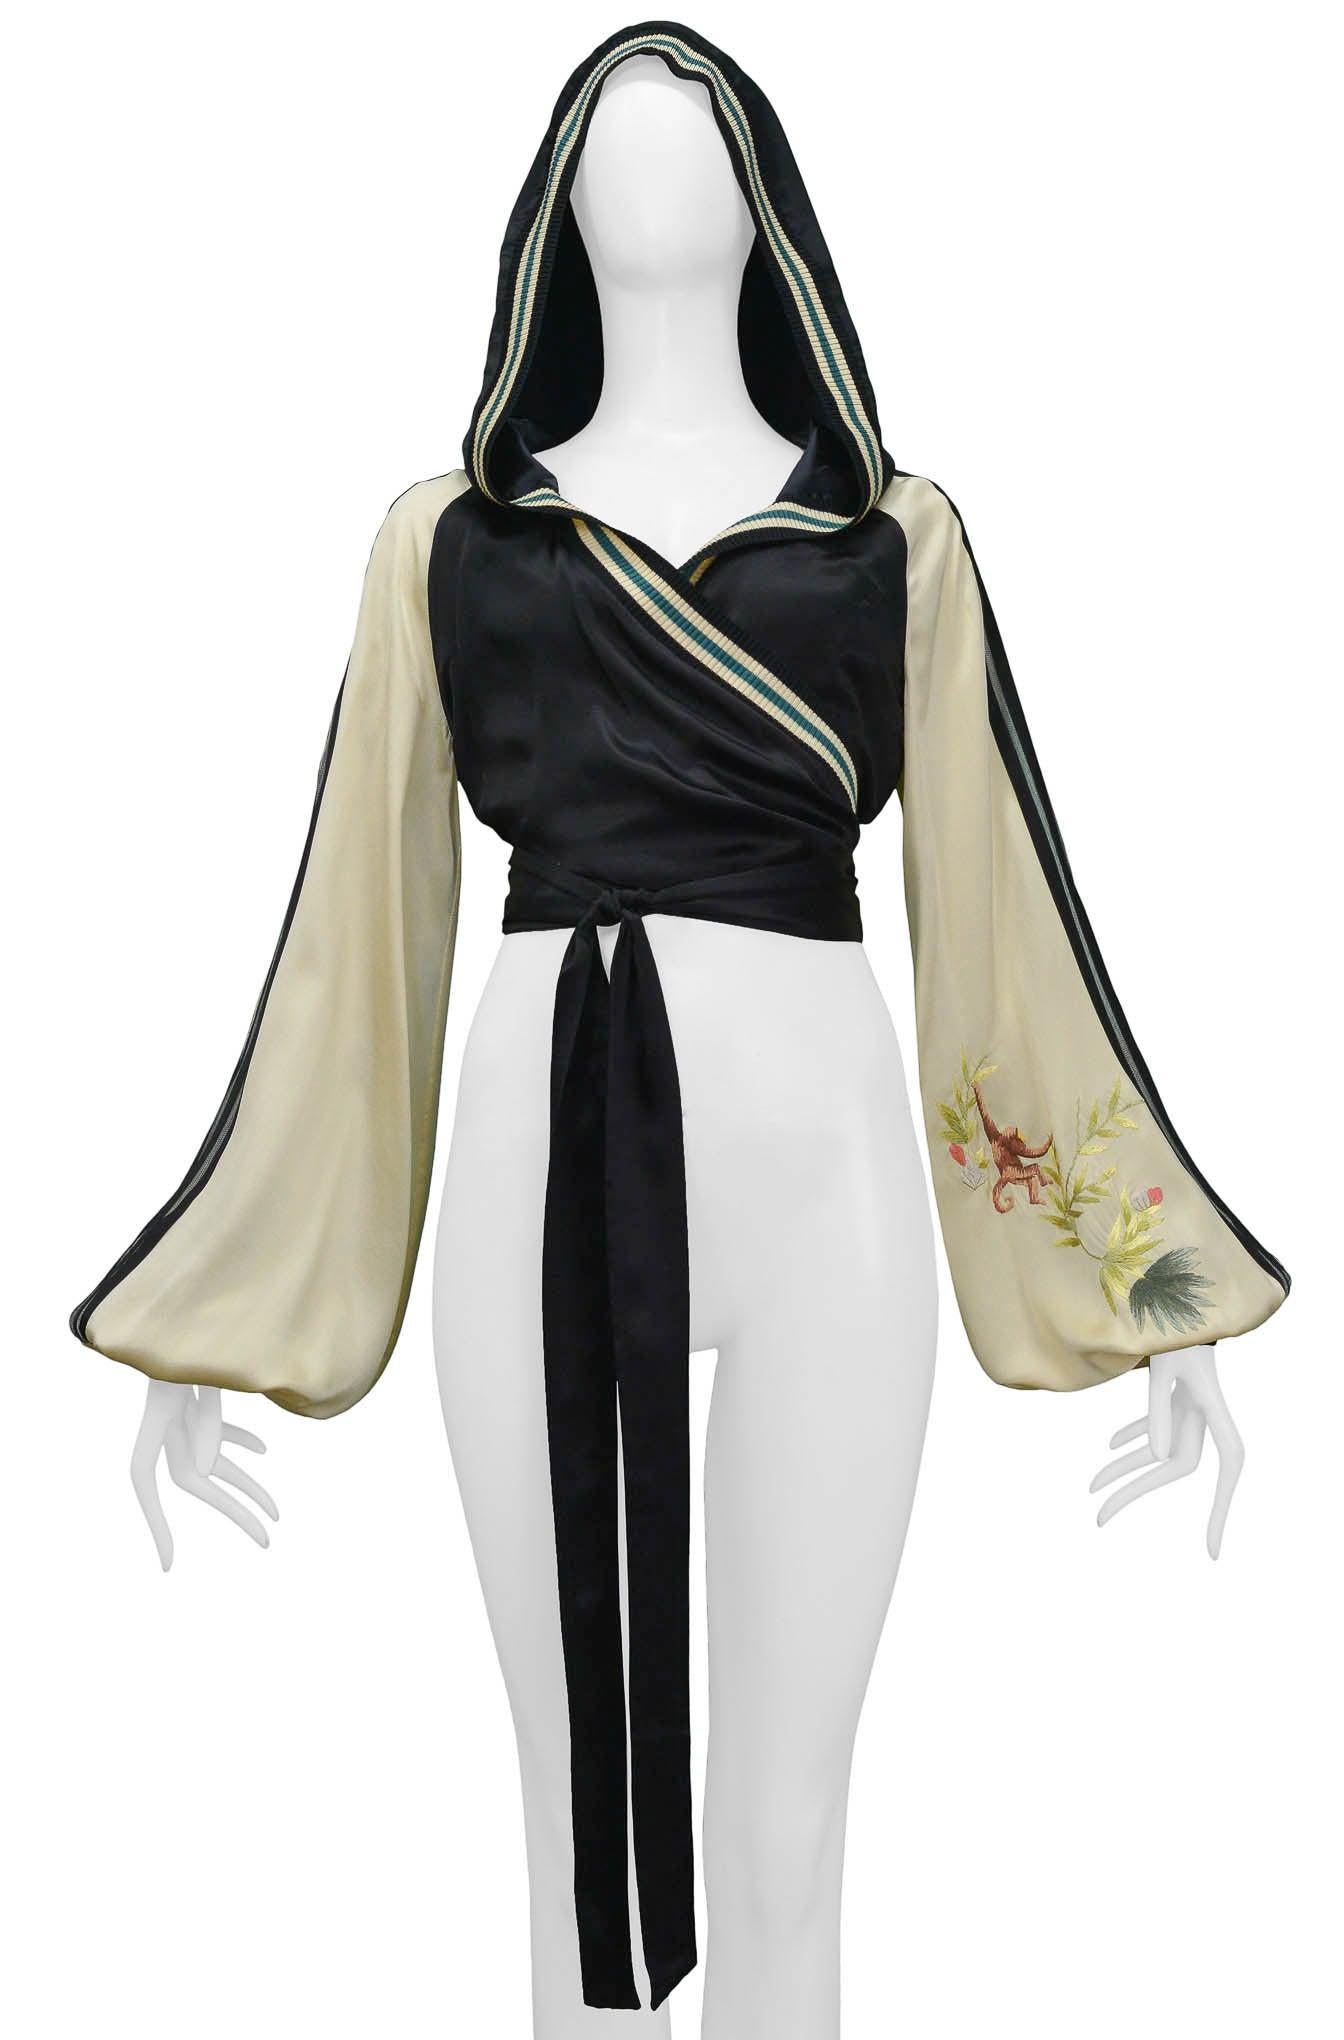 Jean Paul Gaultier Embroidered Bomber Jacket & Dress Ensemble 2007 2